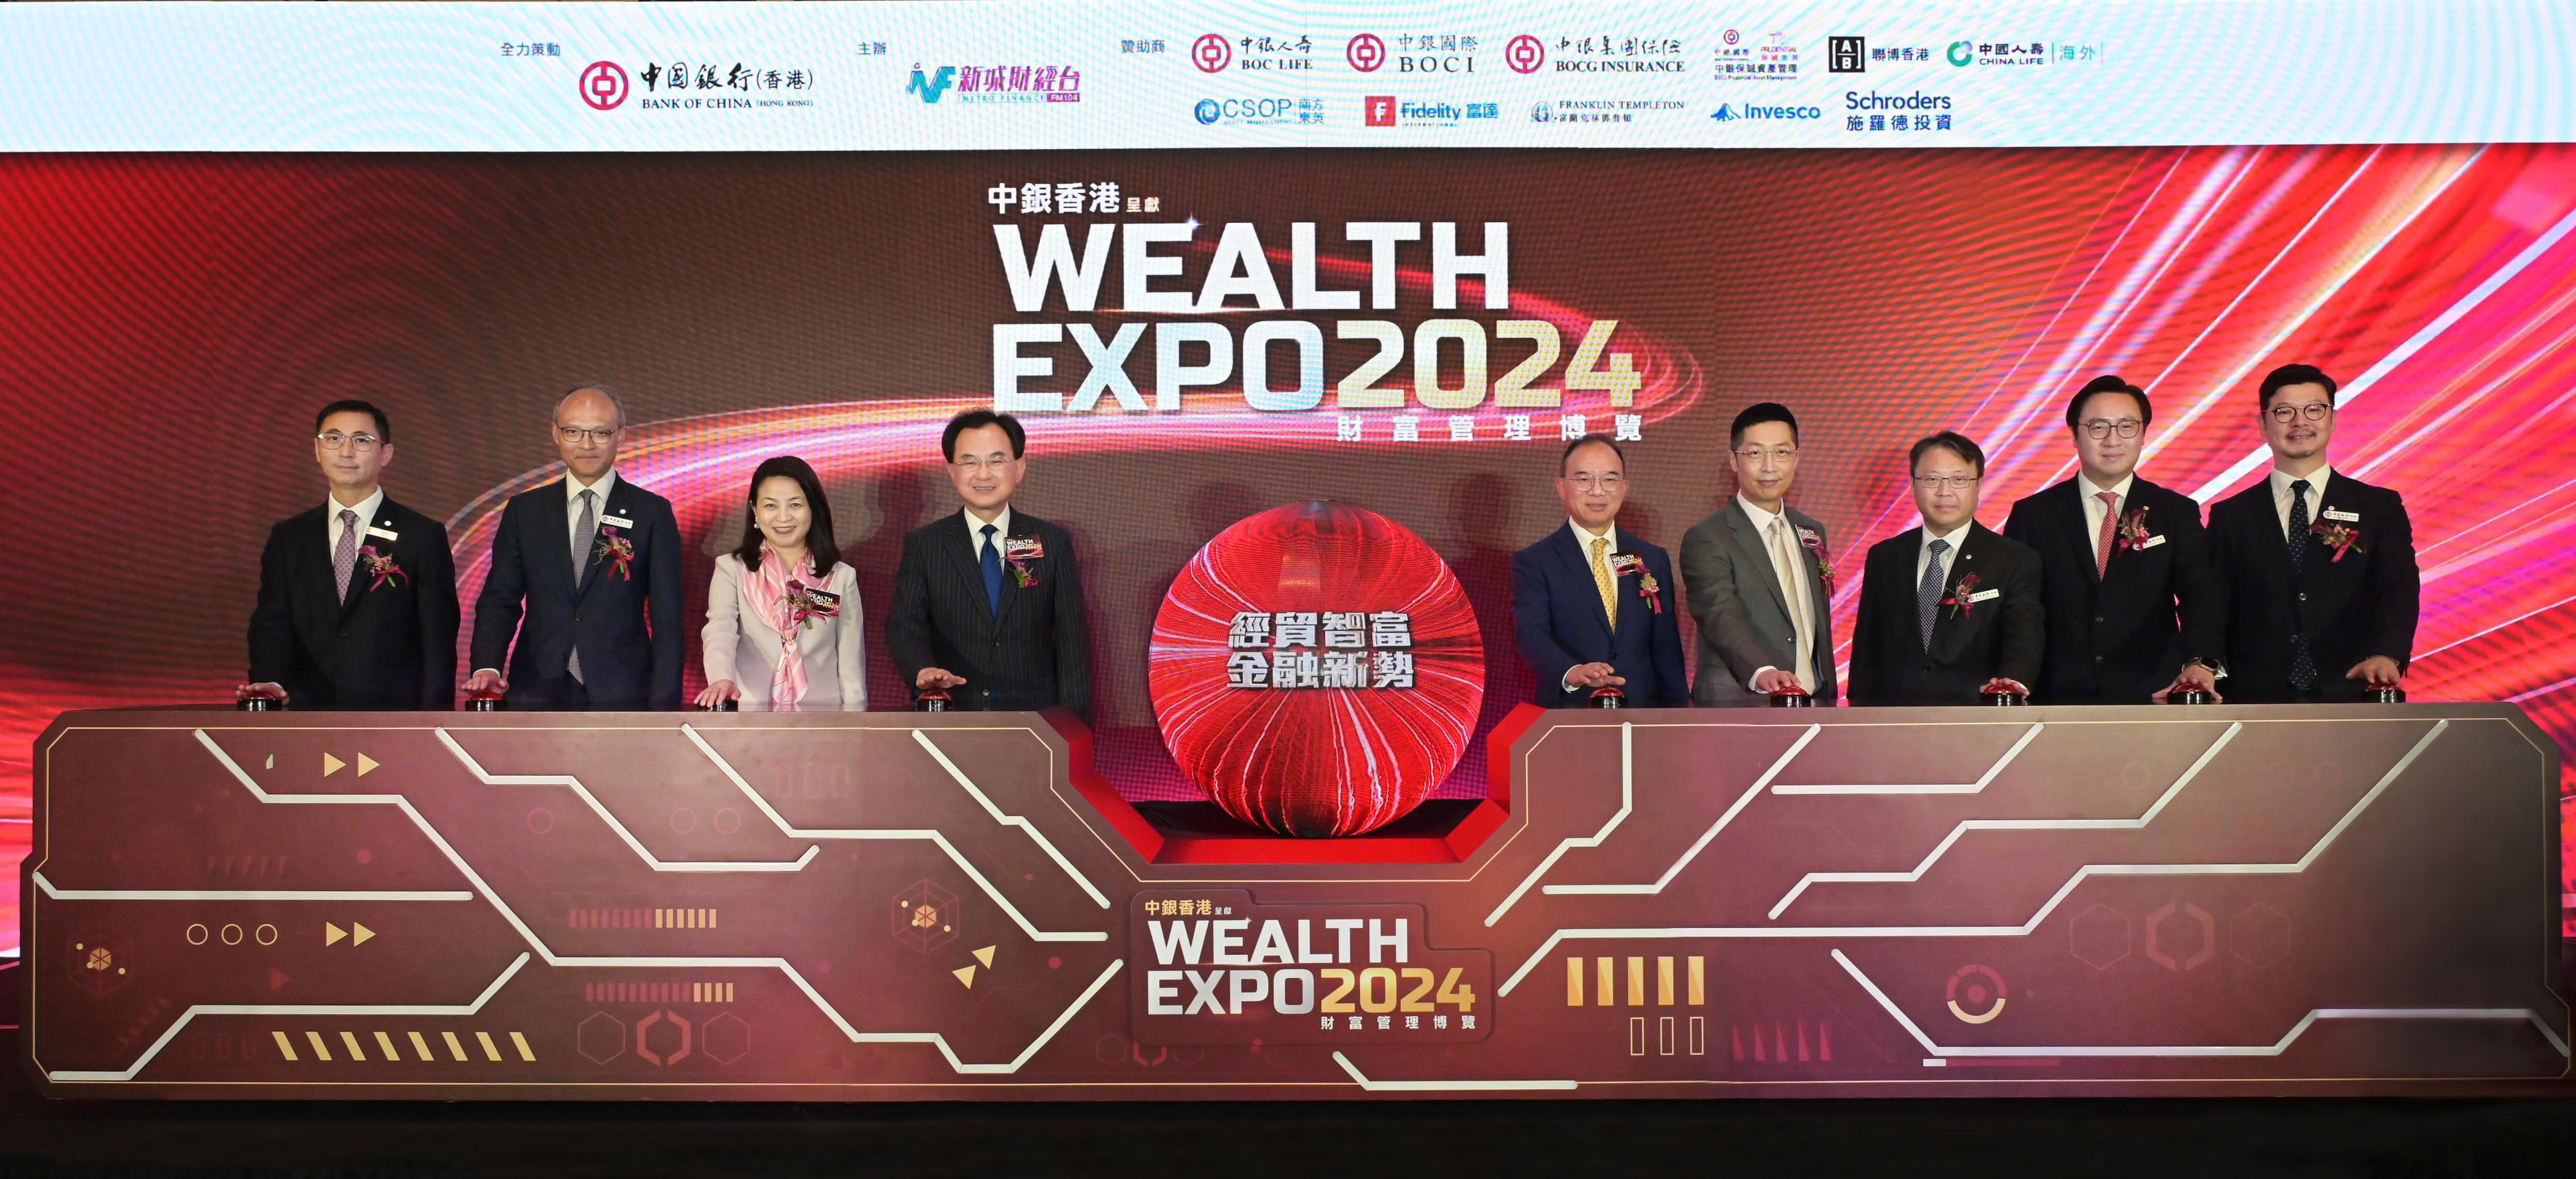 Officiating guests of Wealth Management Expo 2024: Mr. Erick Tsang Kwok-wai, GBS, IDSM, JP, Secretary for Constitutional and Mainland Affairs; Mr Stephen Chan, Deputy Chief Executive of BOCHK; Mr. Steven Ma, Chief Operating Officer of Metro Broadcast; and a host of BOCHK representatives.